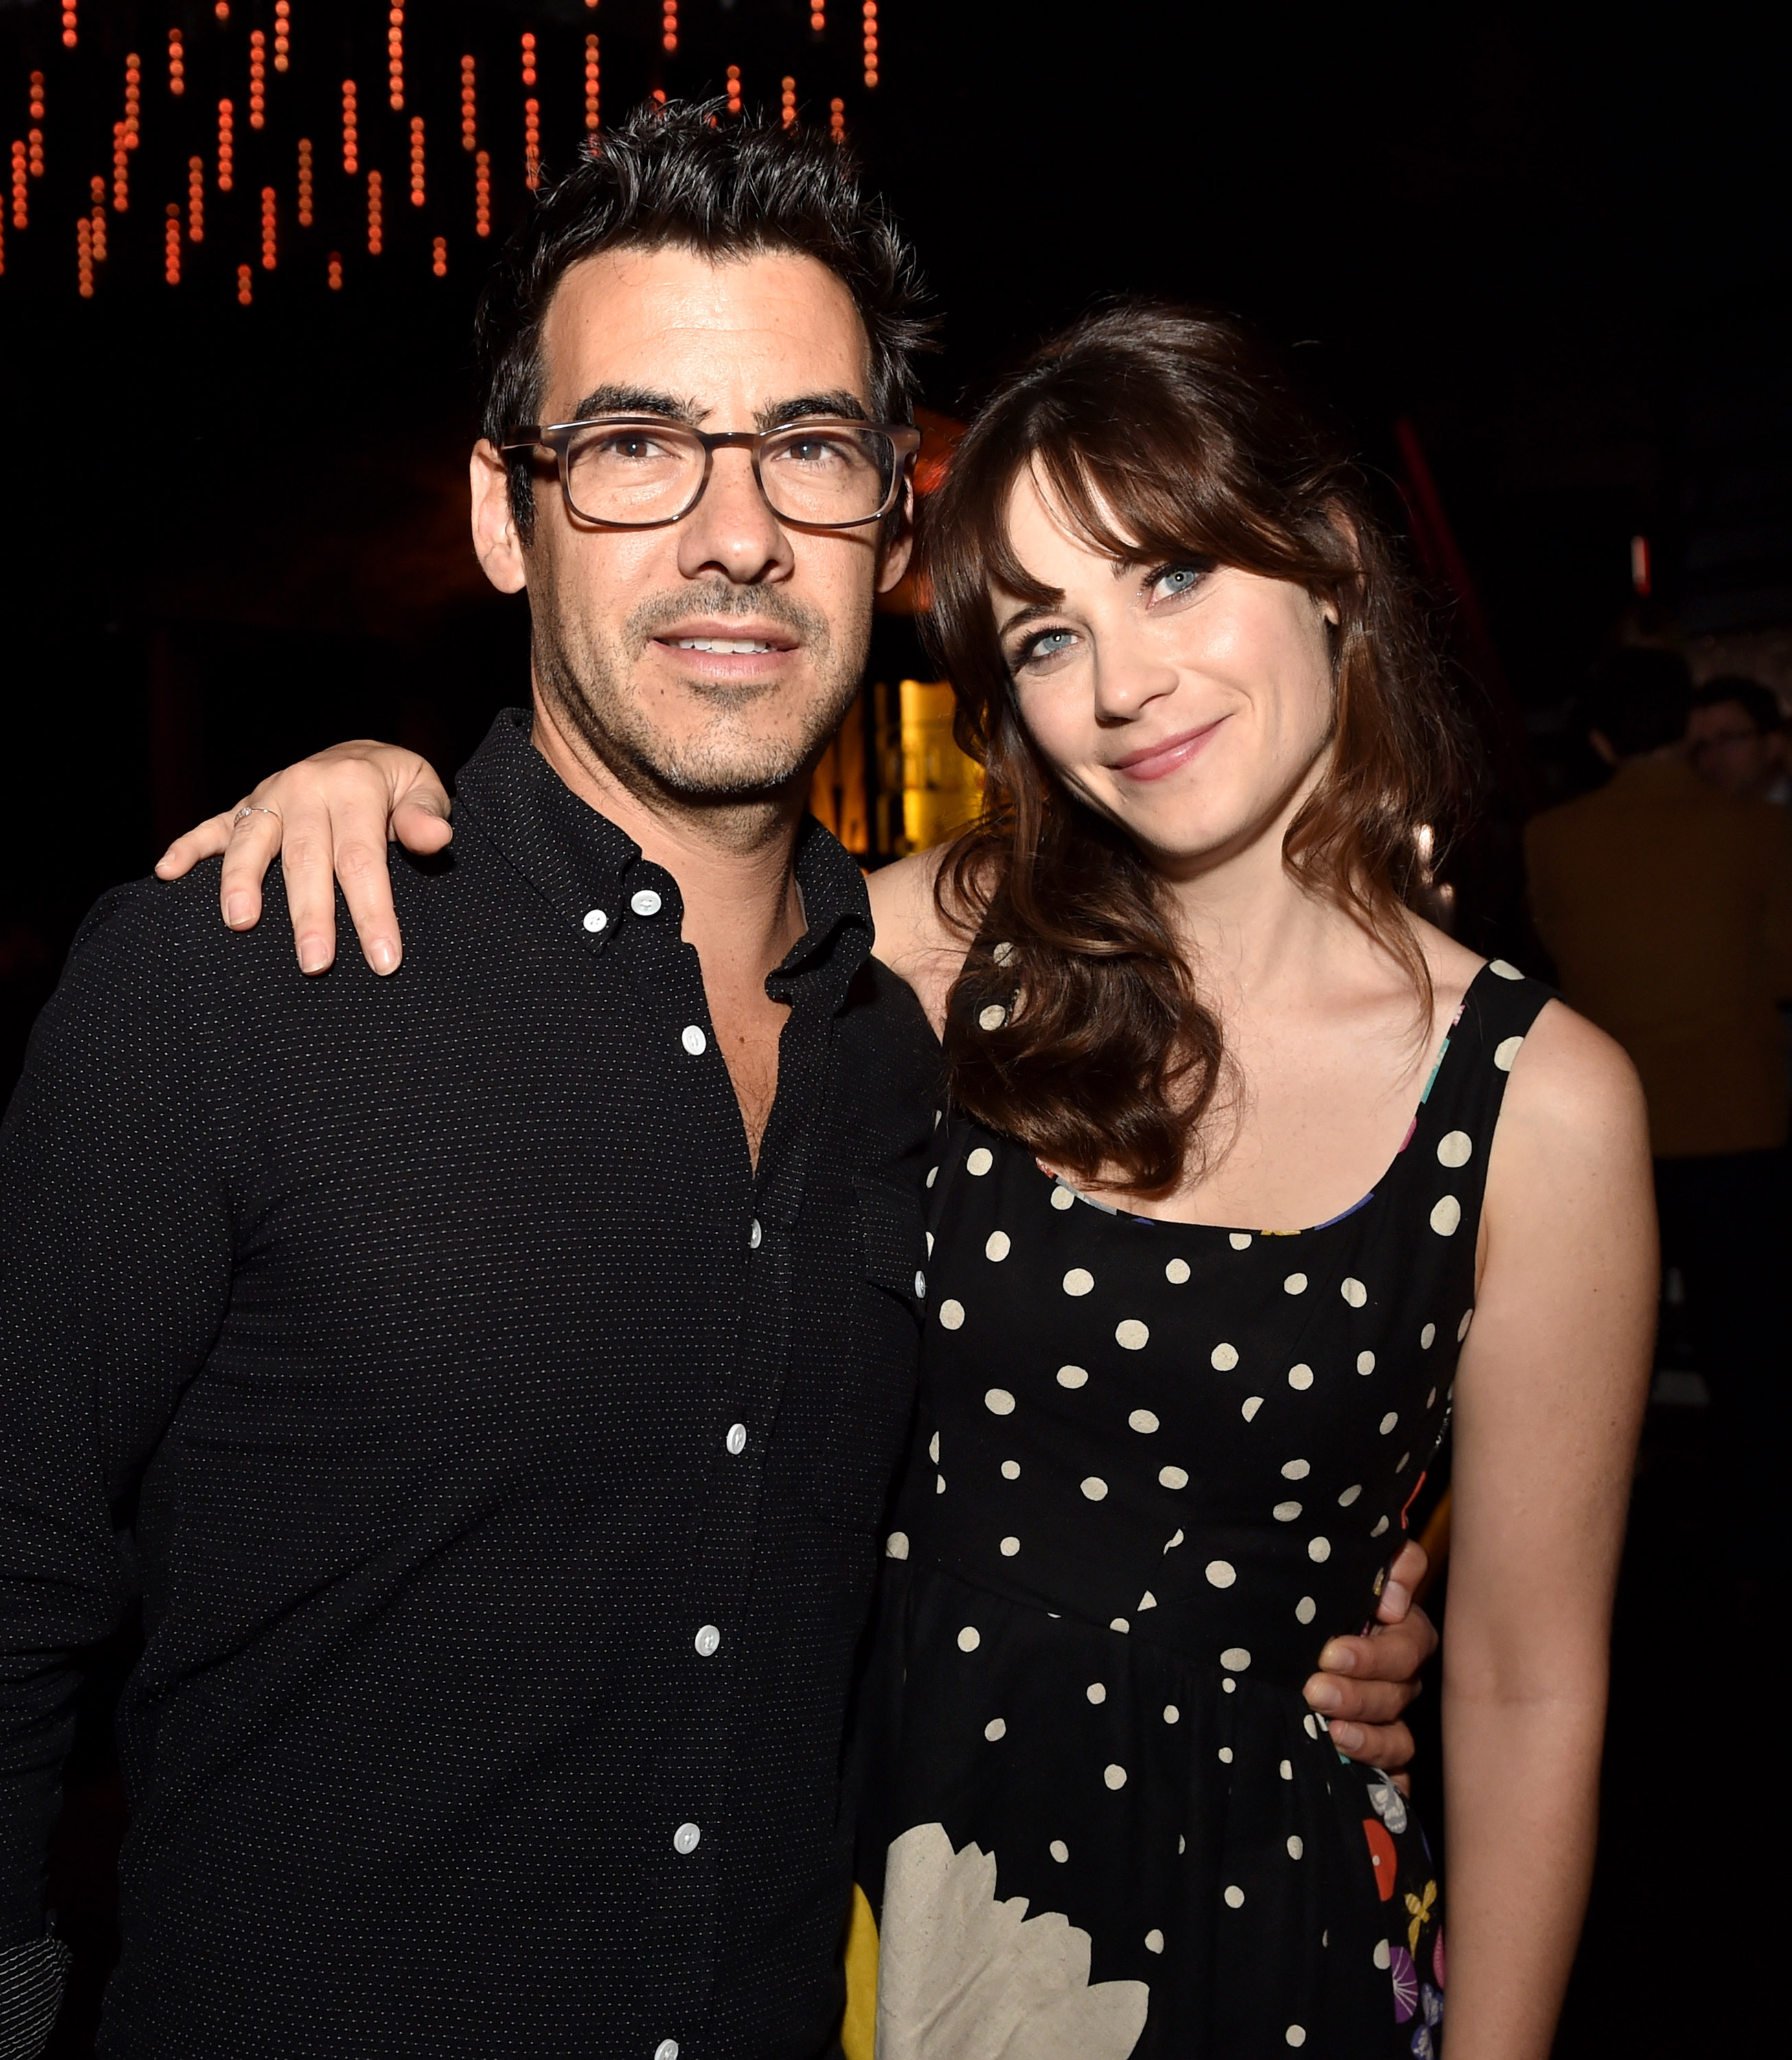 Zooey Deschanel and Jacob Pechenik at an event for The Skeleton Twins (2014)